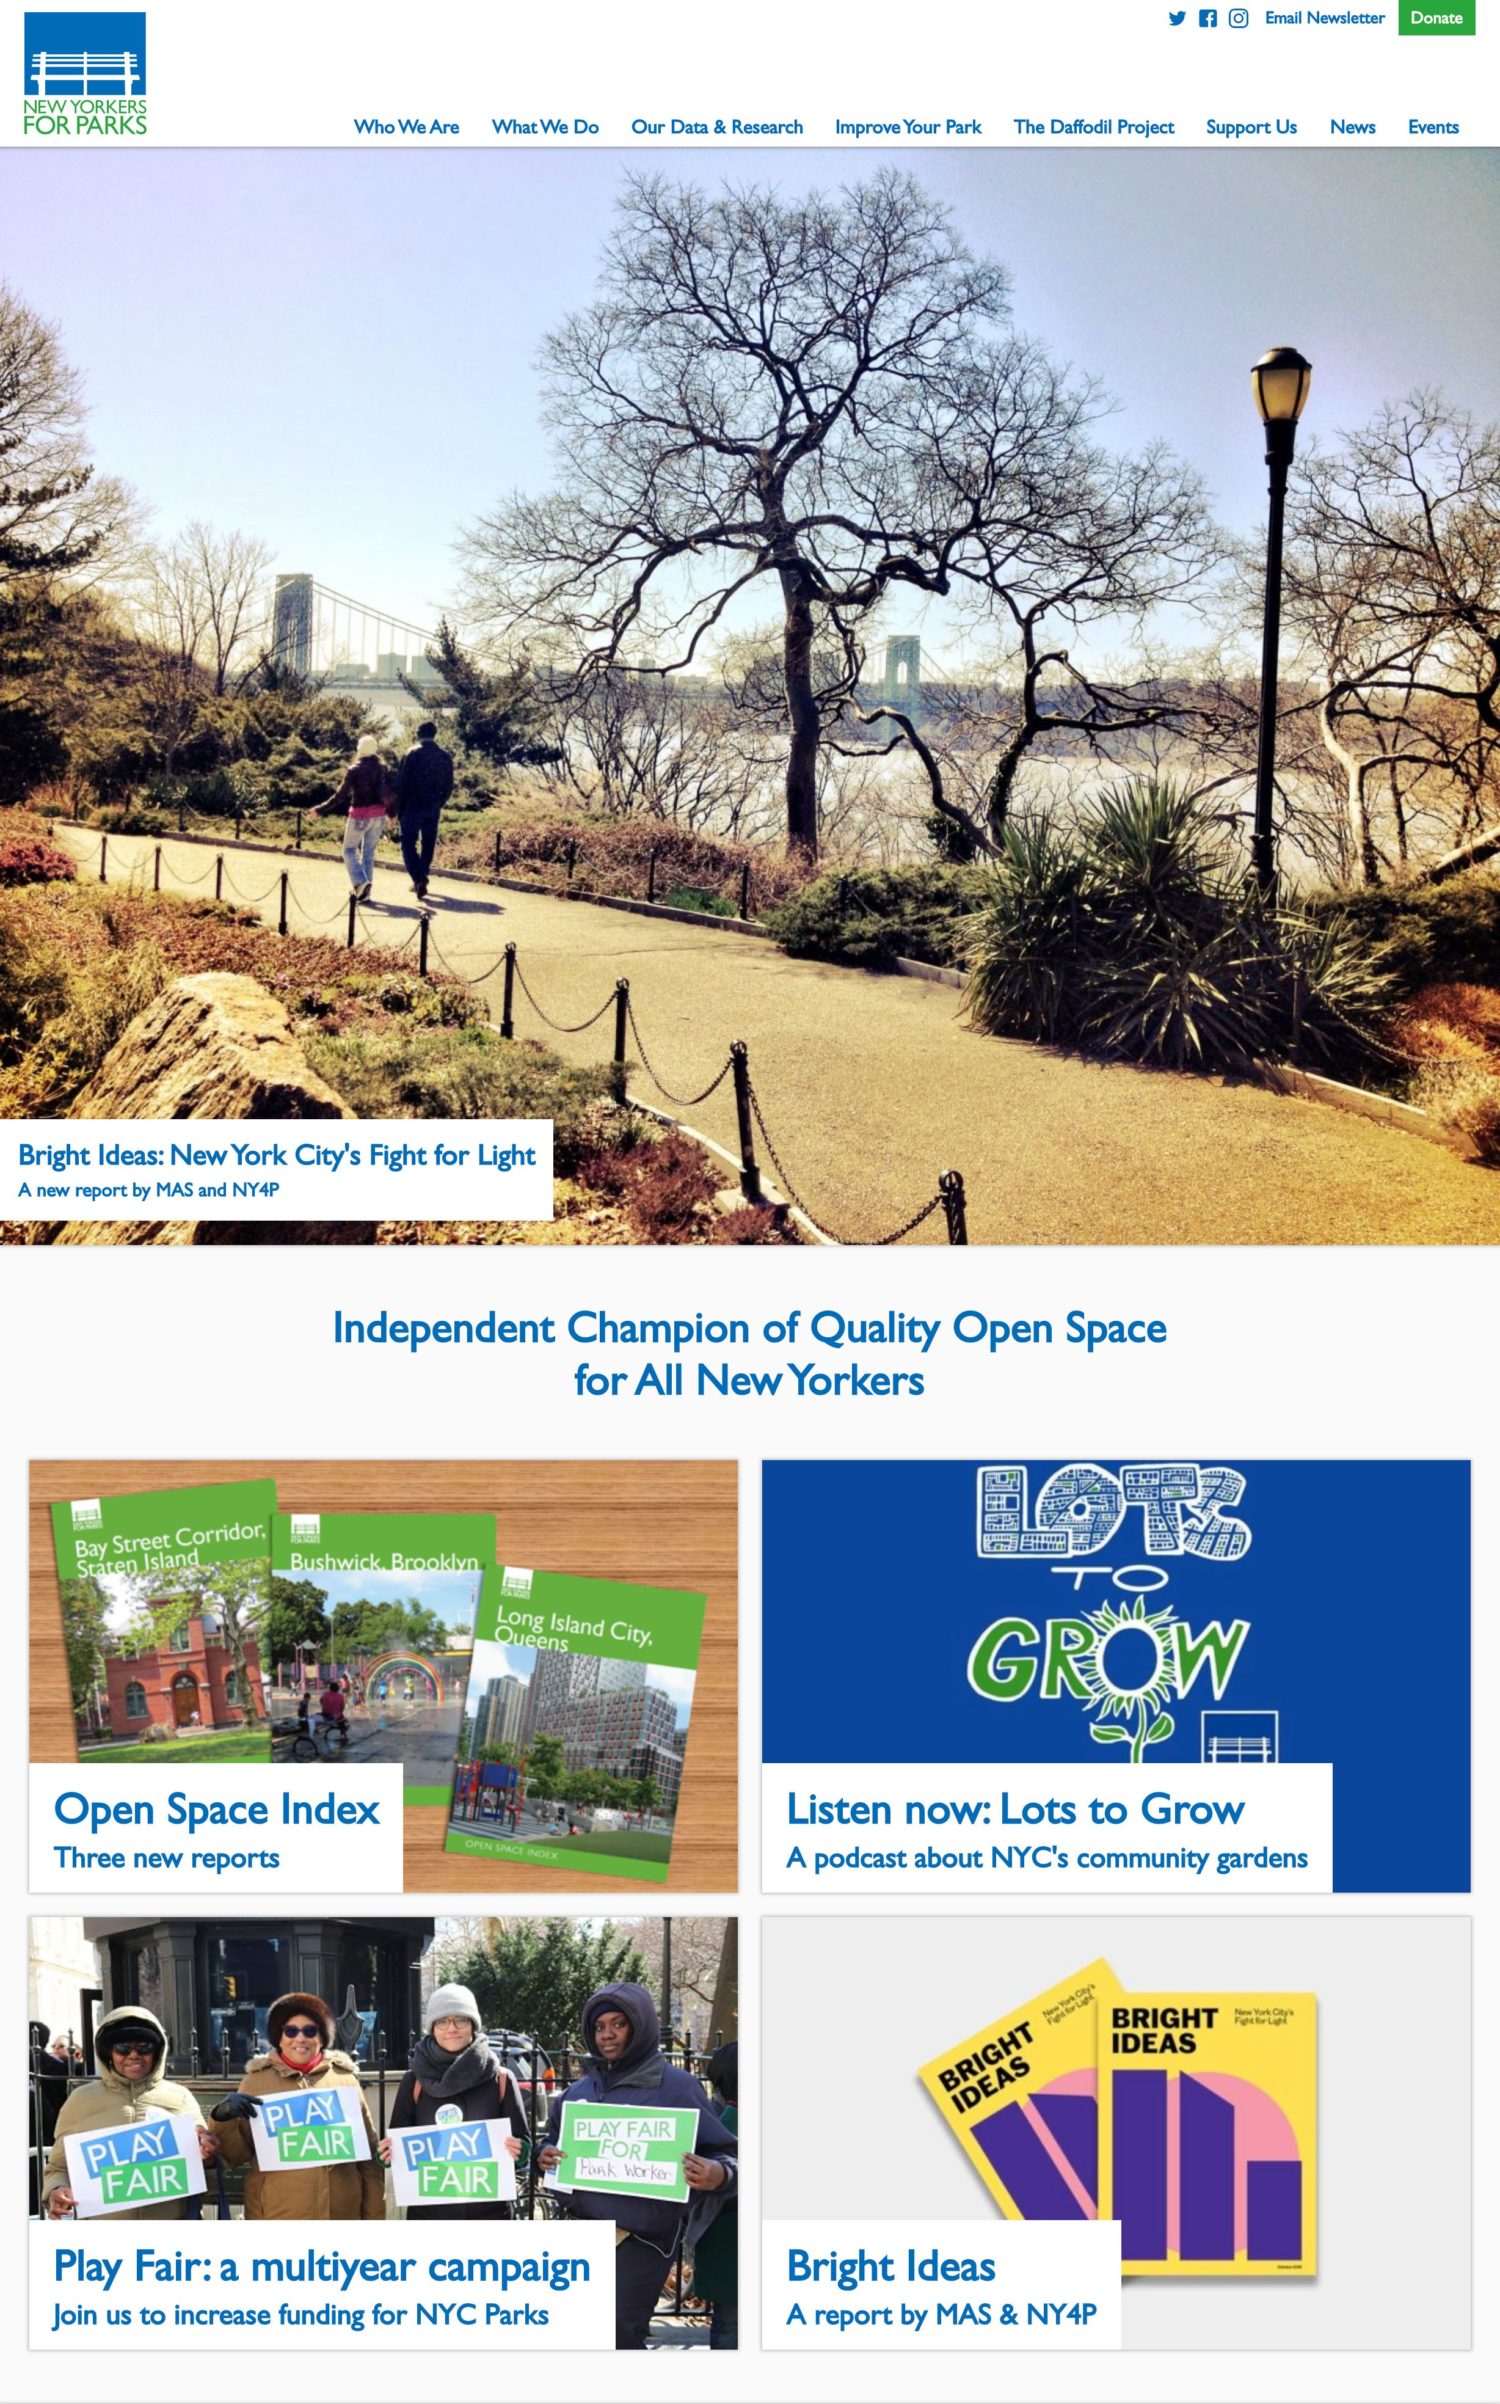 Screenshot of the New Yorkers for Parks website's homepage